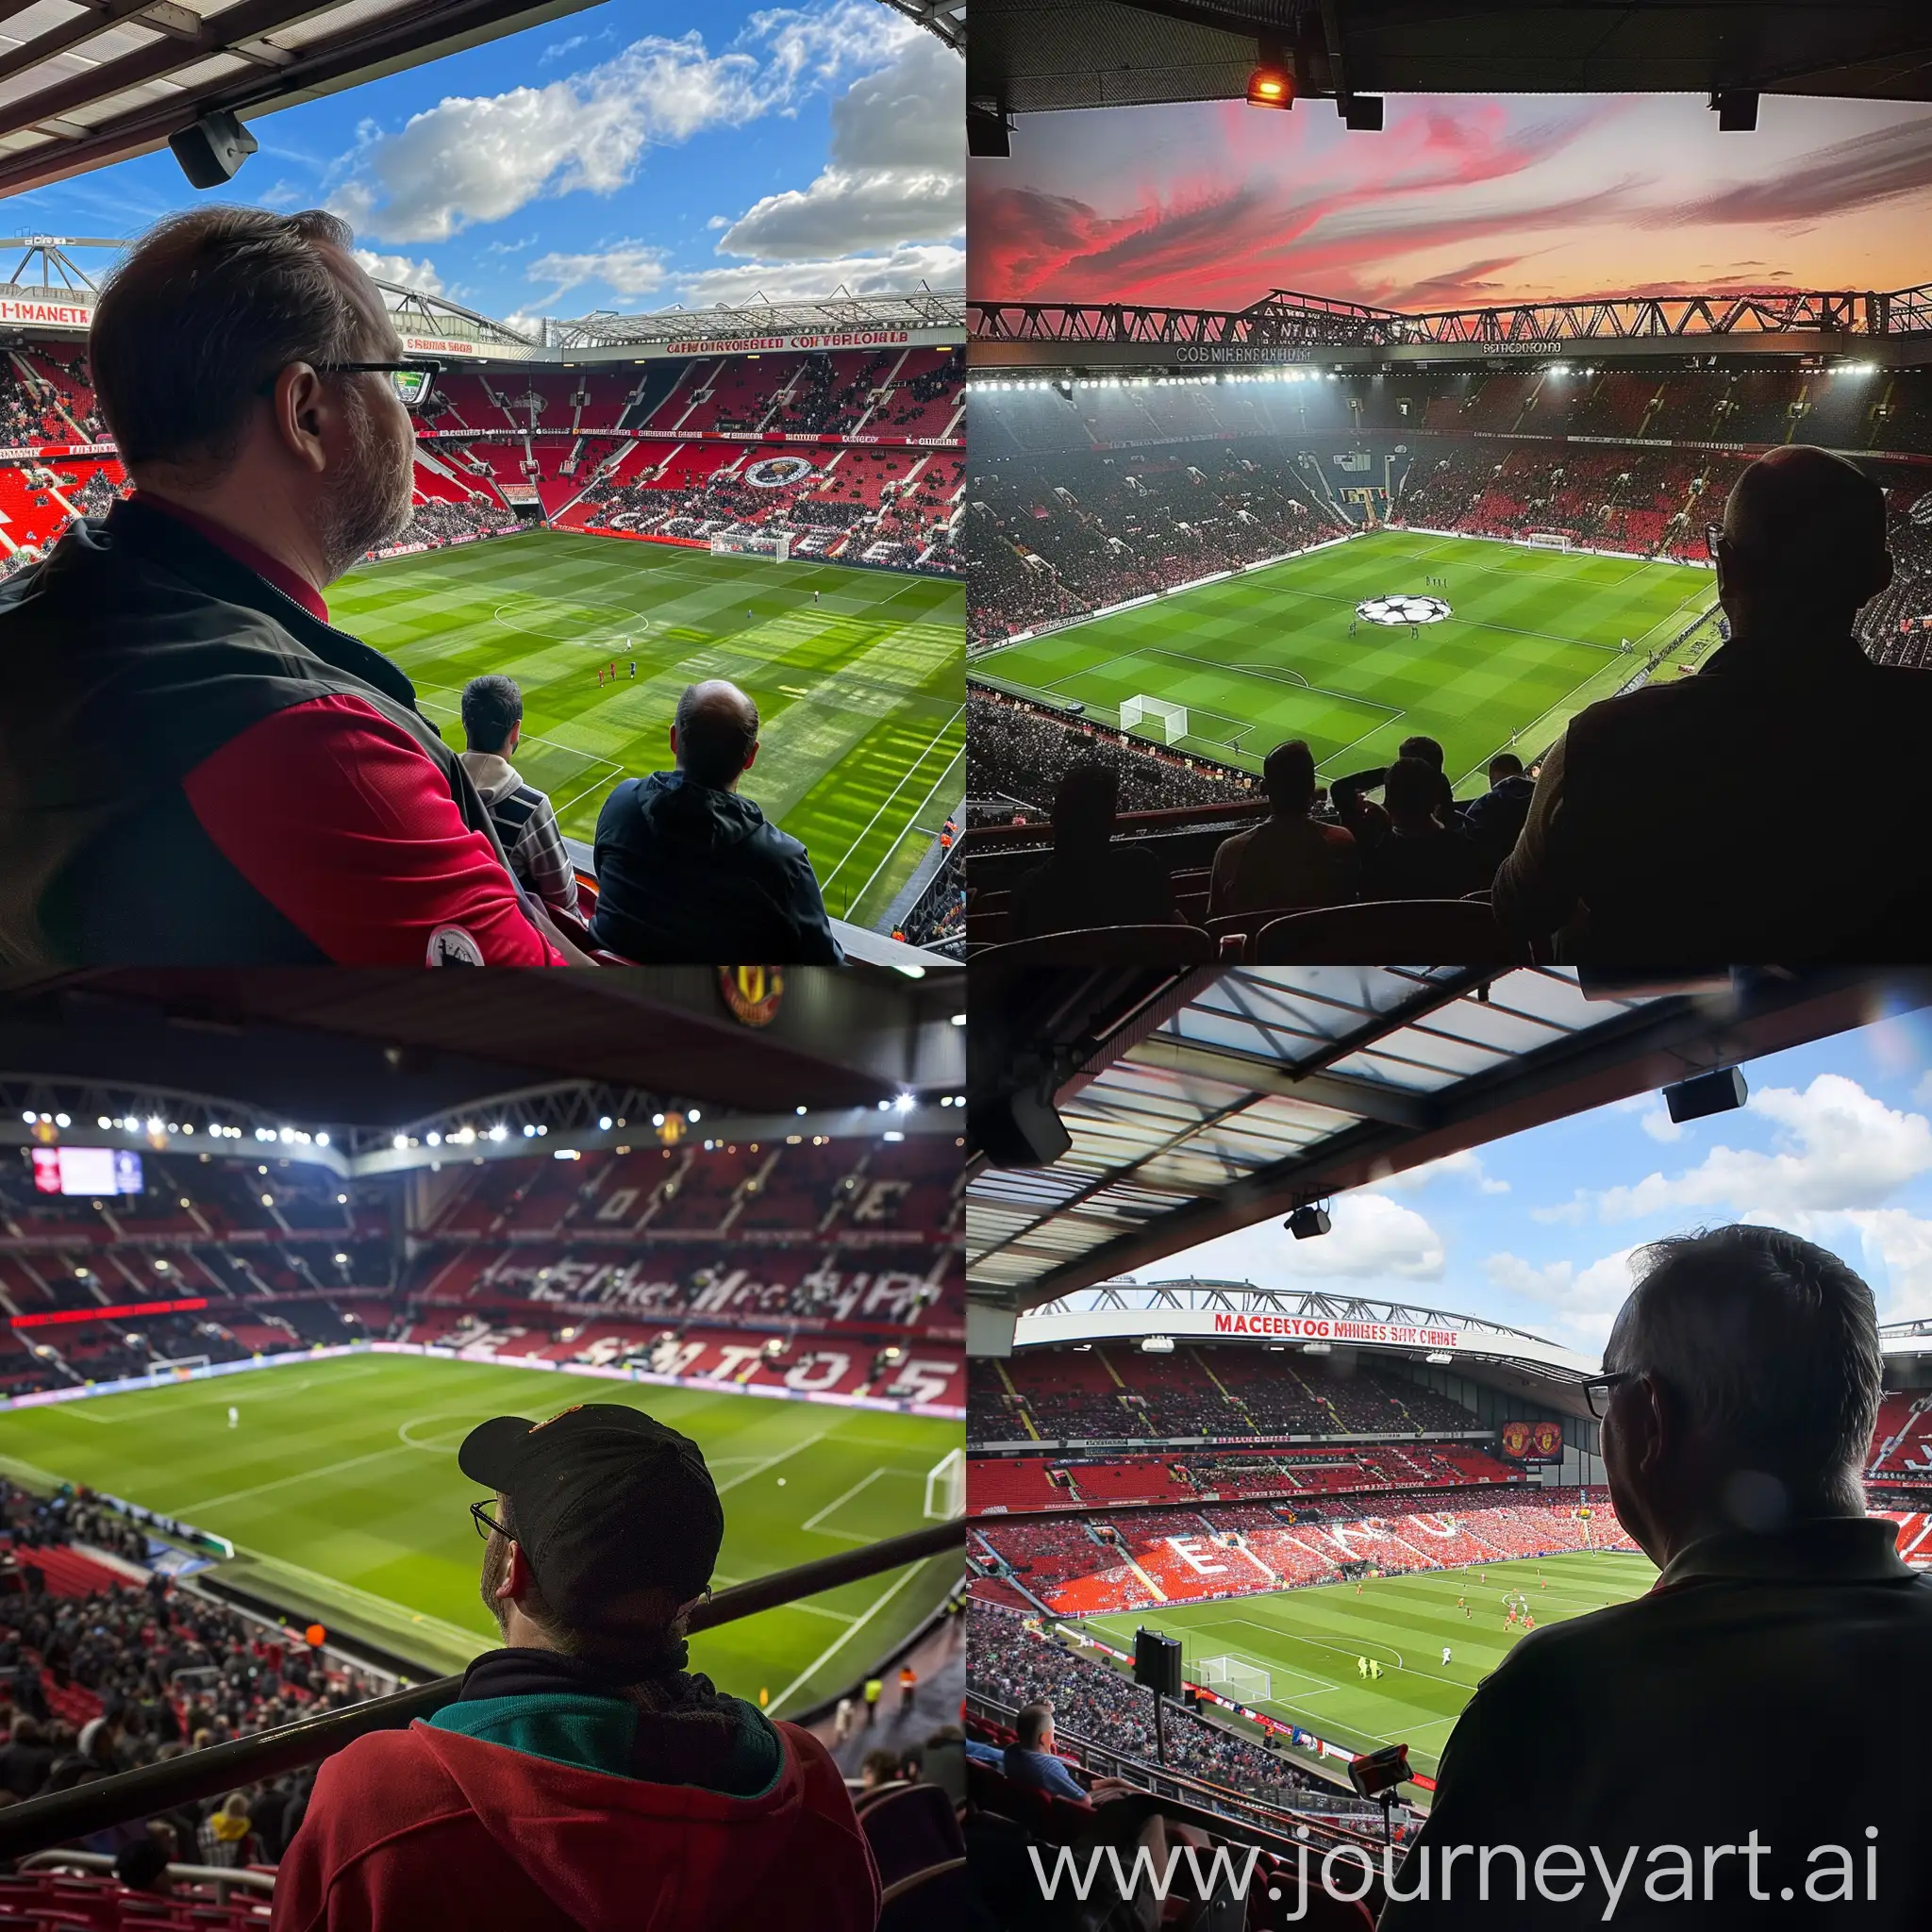 Spectator-Watching-Manchester-United-Final-in-Champions-League-at-Old-Trafford-Stadium